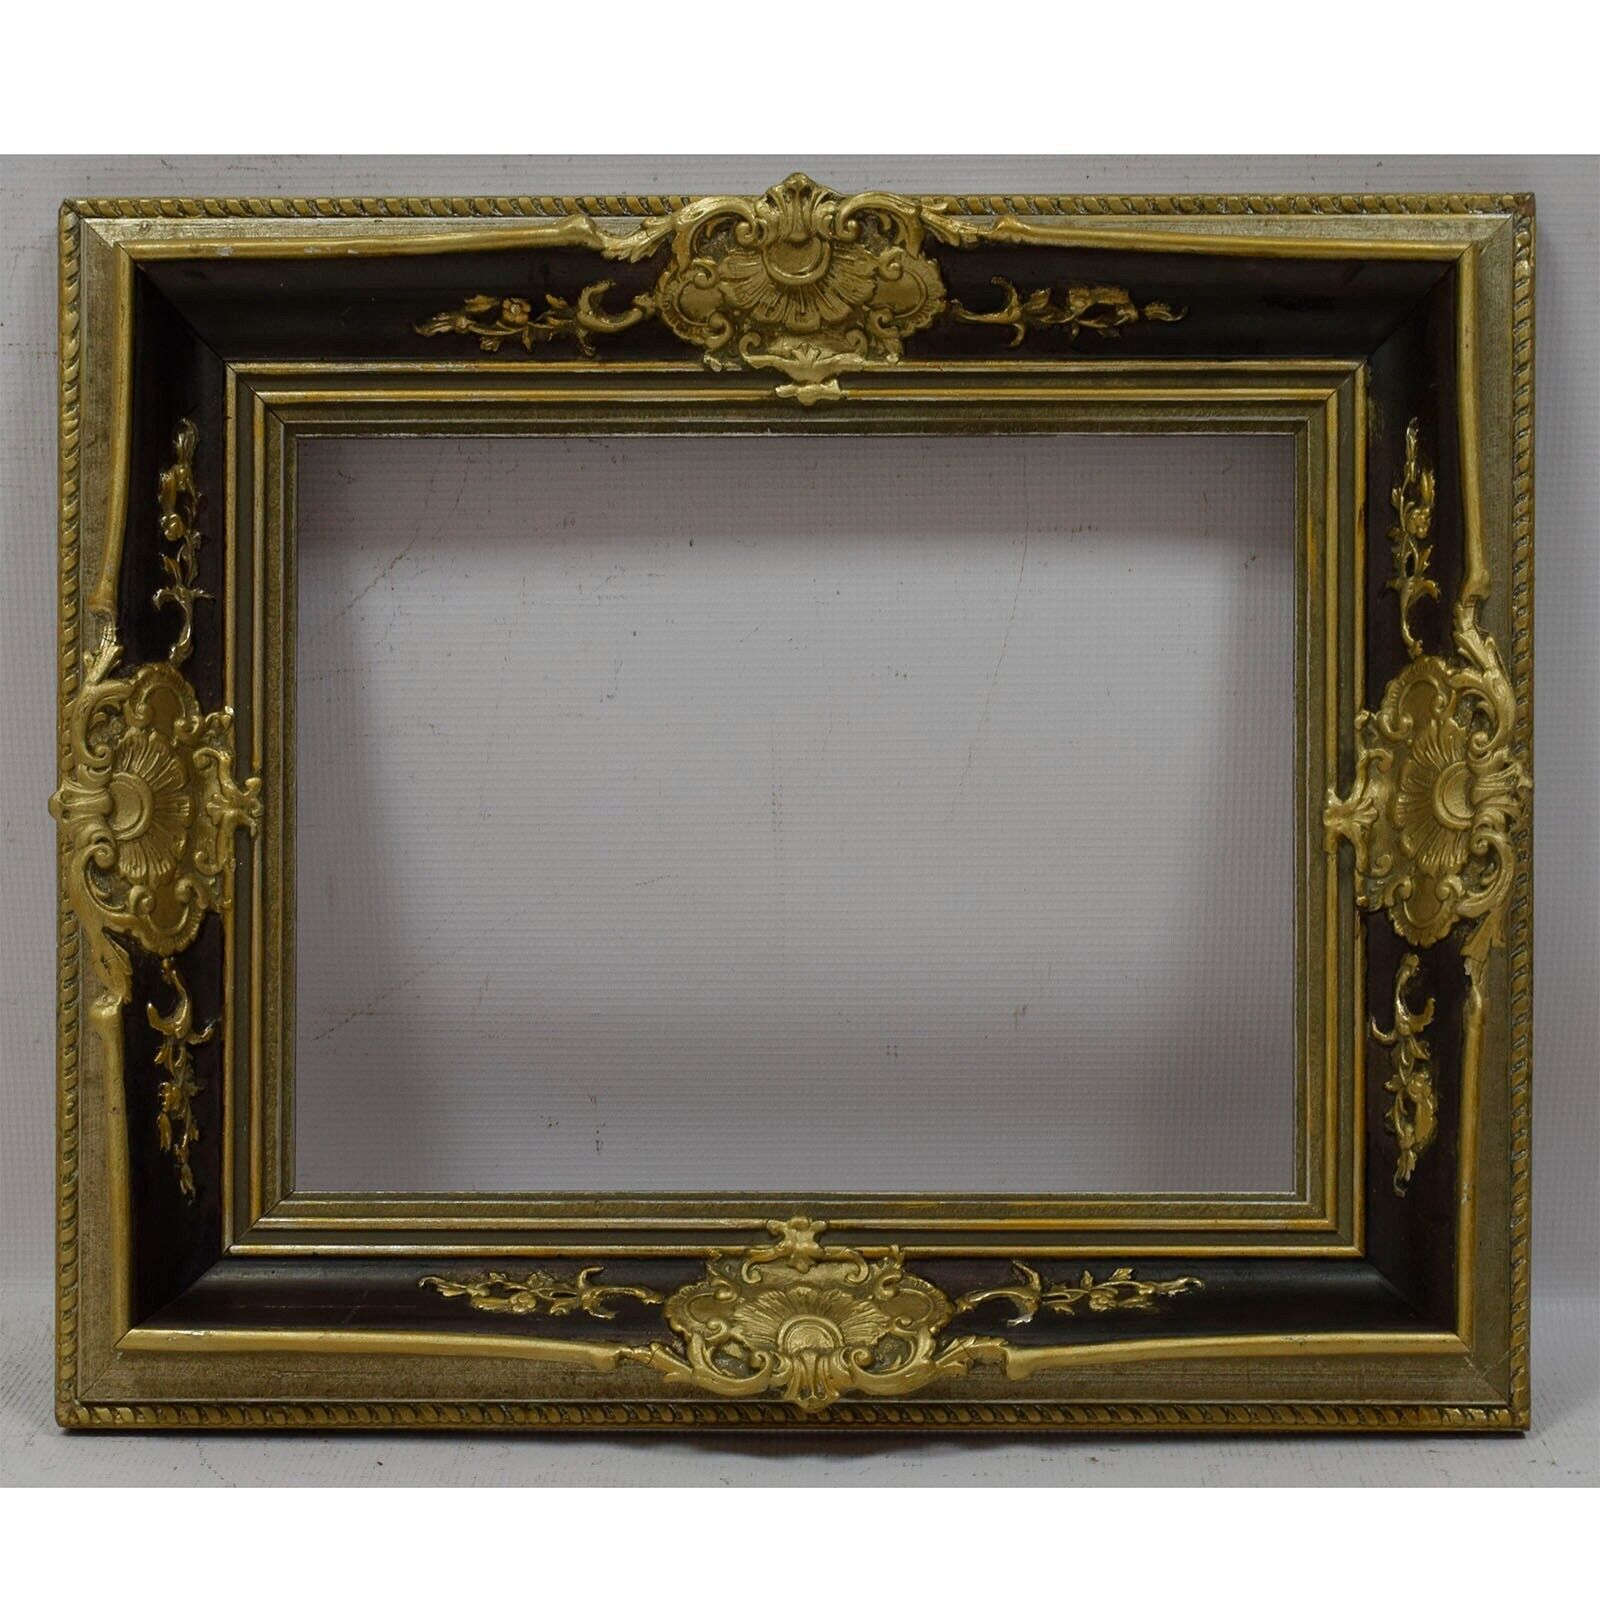 Ca. 1930-1940 Old wooden frame decorative corners Internal: 13.7x10.6 in